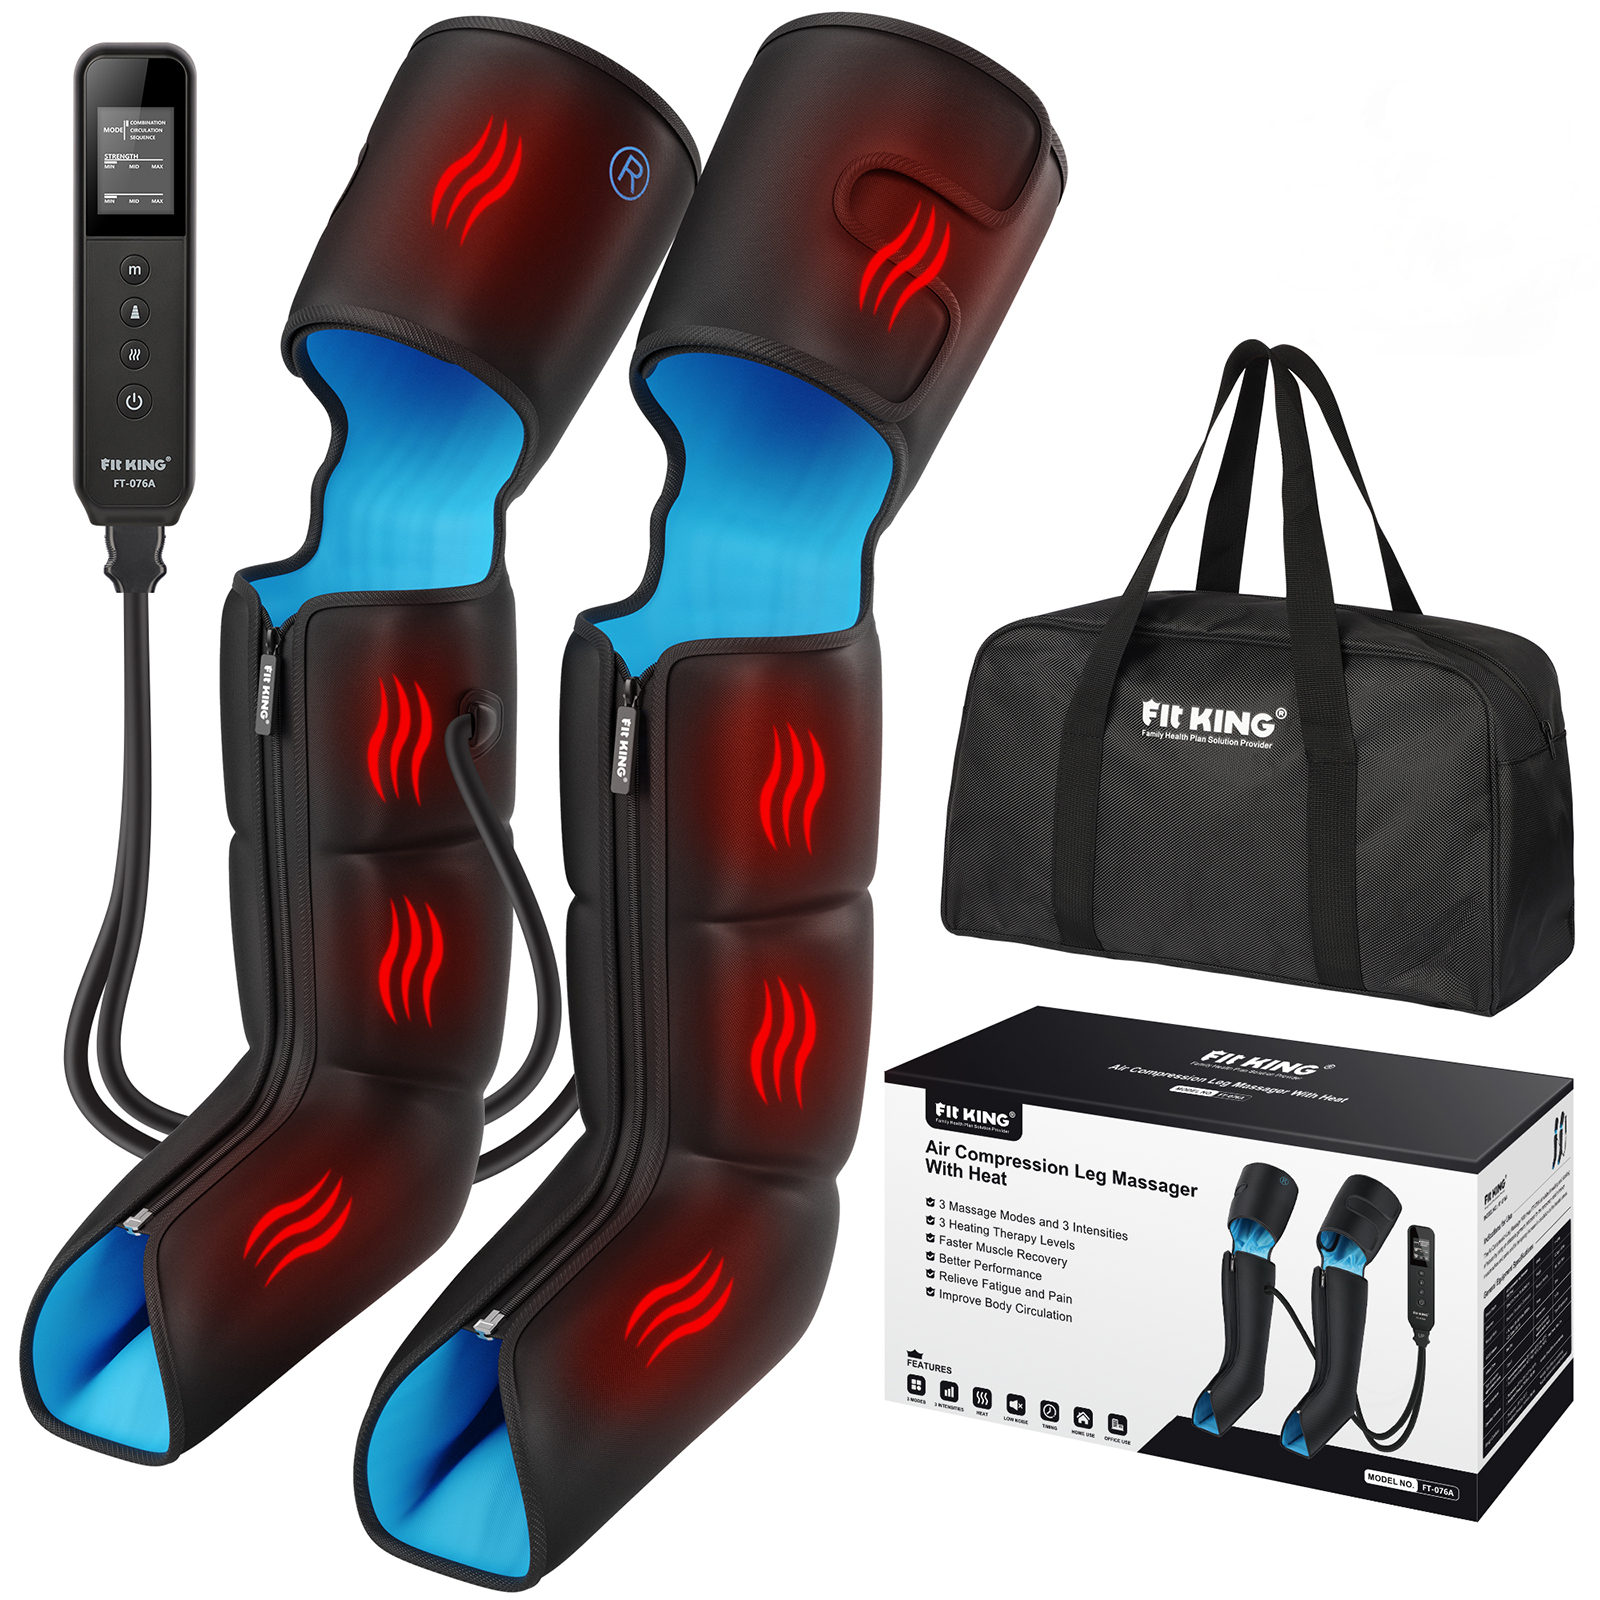 Full Leg and Foot Massager with Heat FT-076A-FIT KING